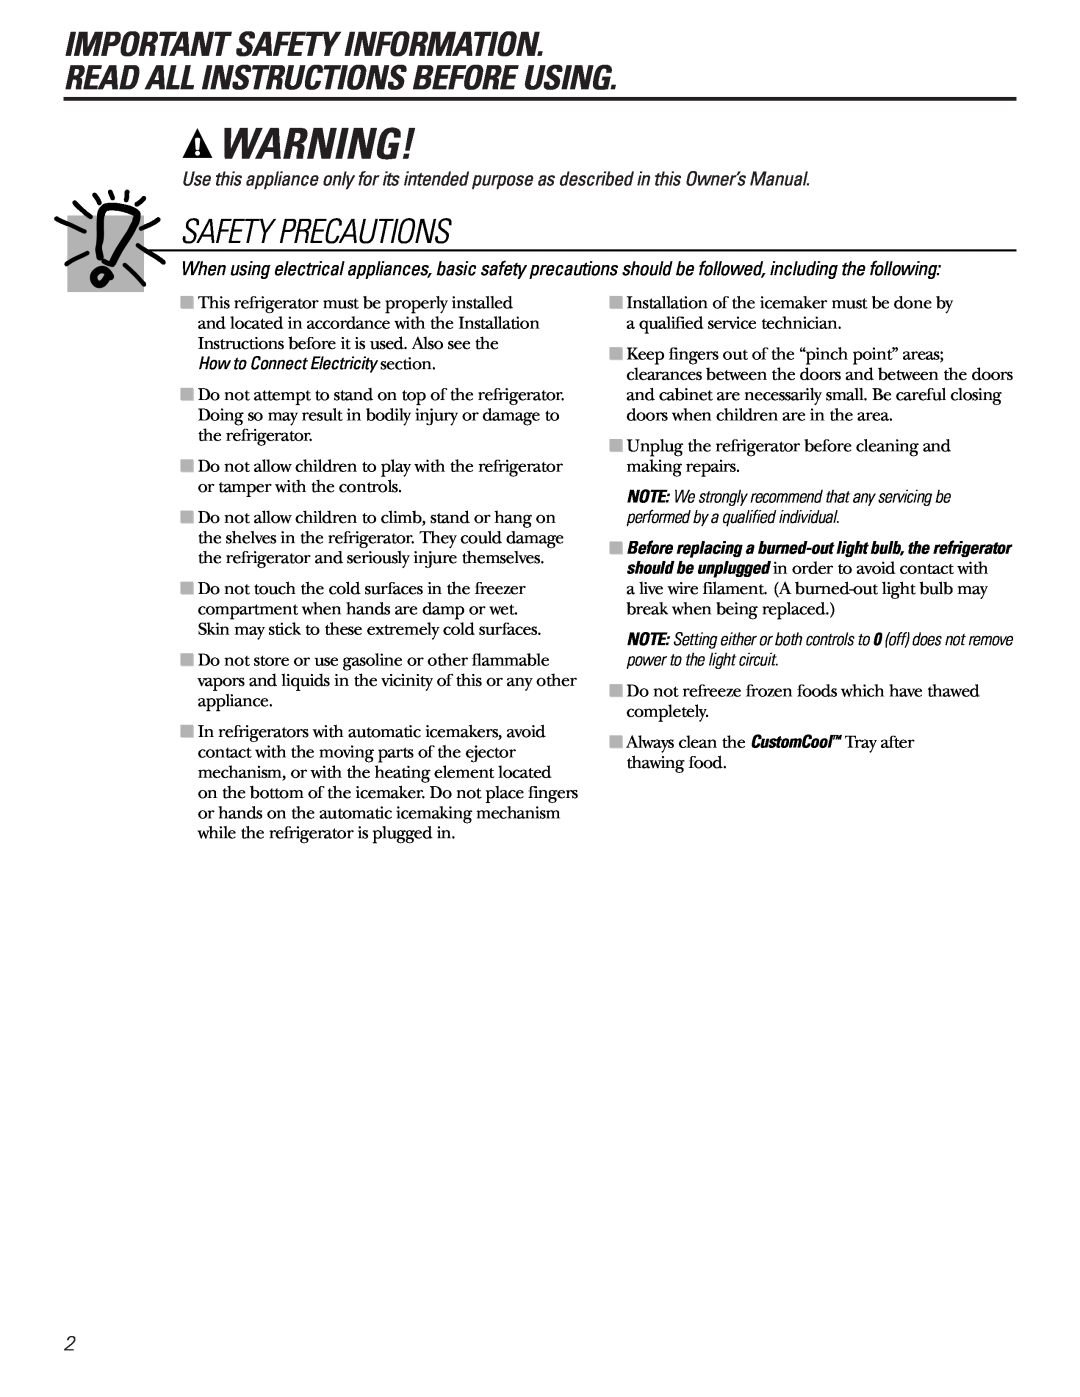 Hotpoint 23 operating instructions Important Safety Information Read All Instructions Before Using, Safety Precautions 